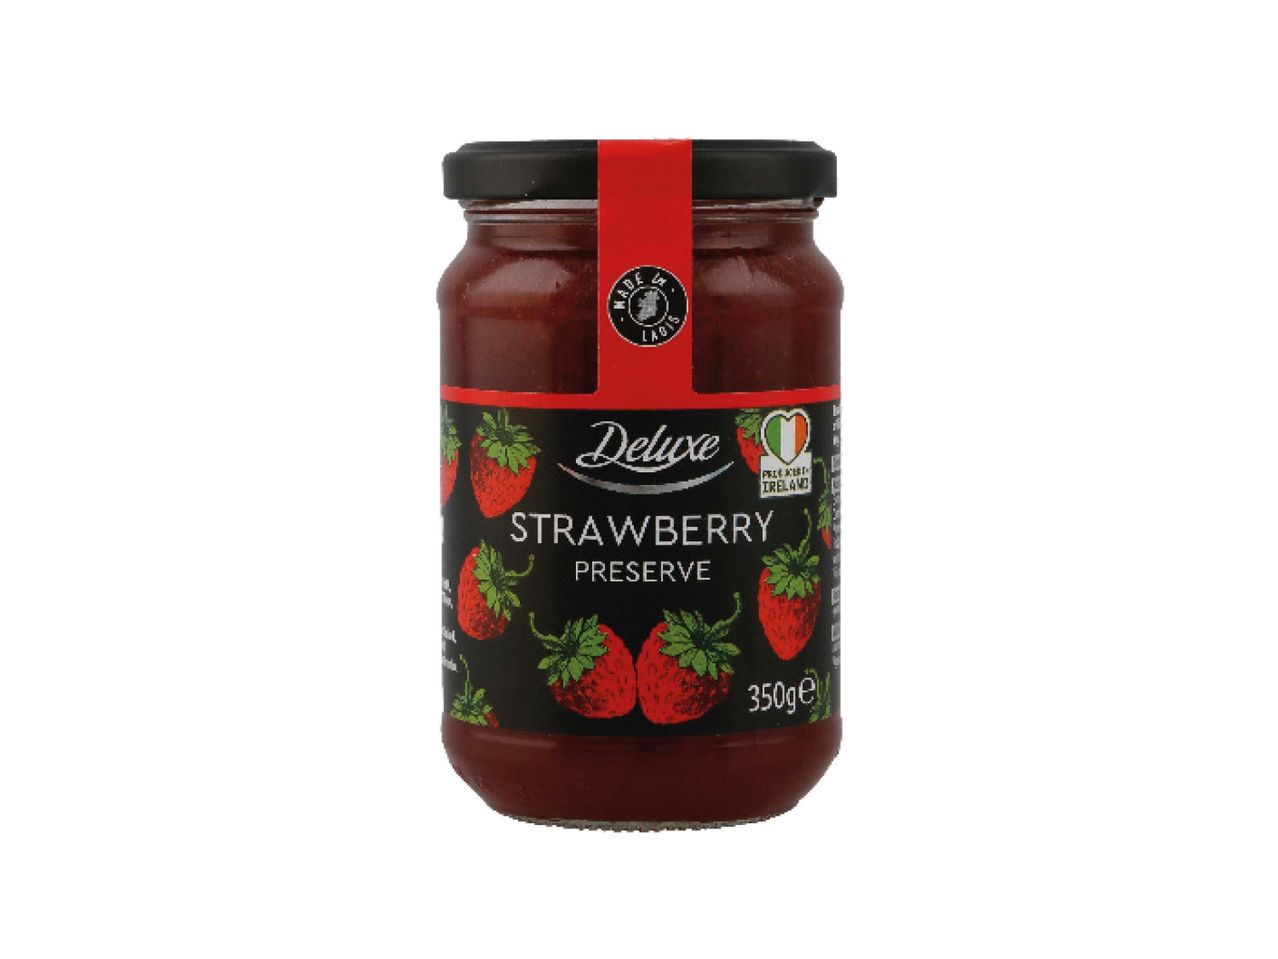 Go to full screen view: Strawberry Preserve - Image 1